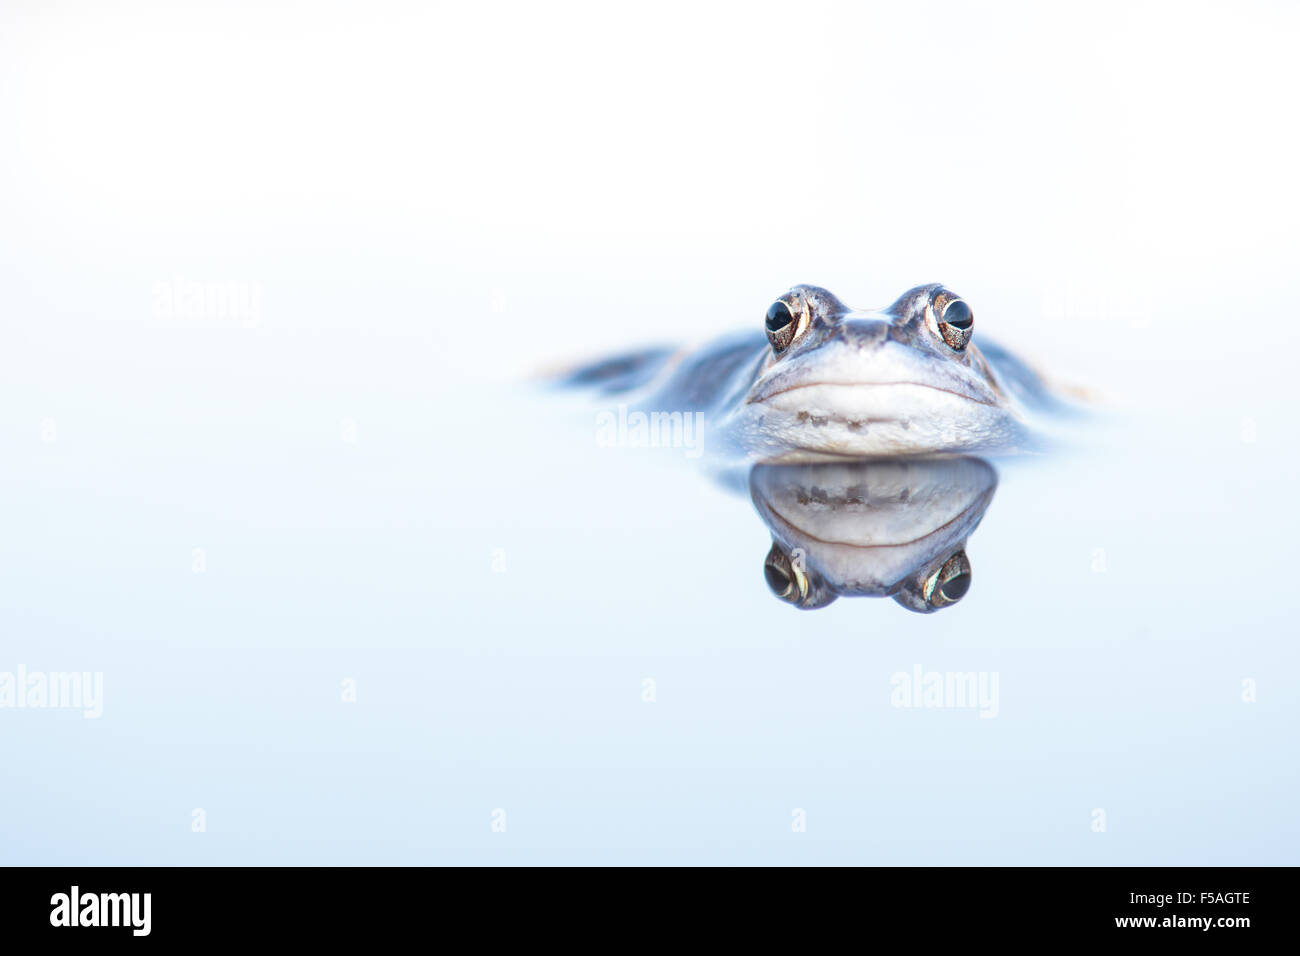 Blue moor frog lying in the water with reflection Stock Photo